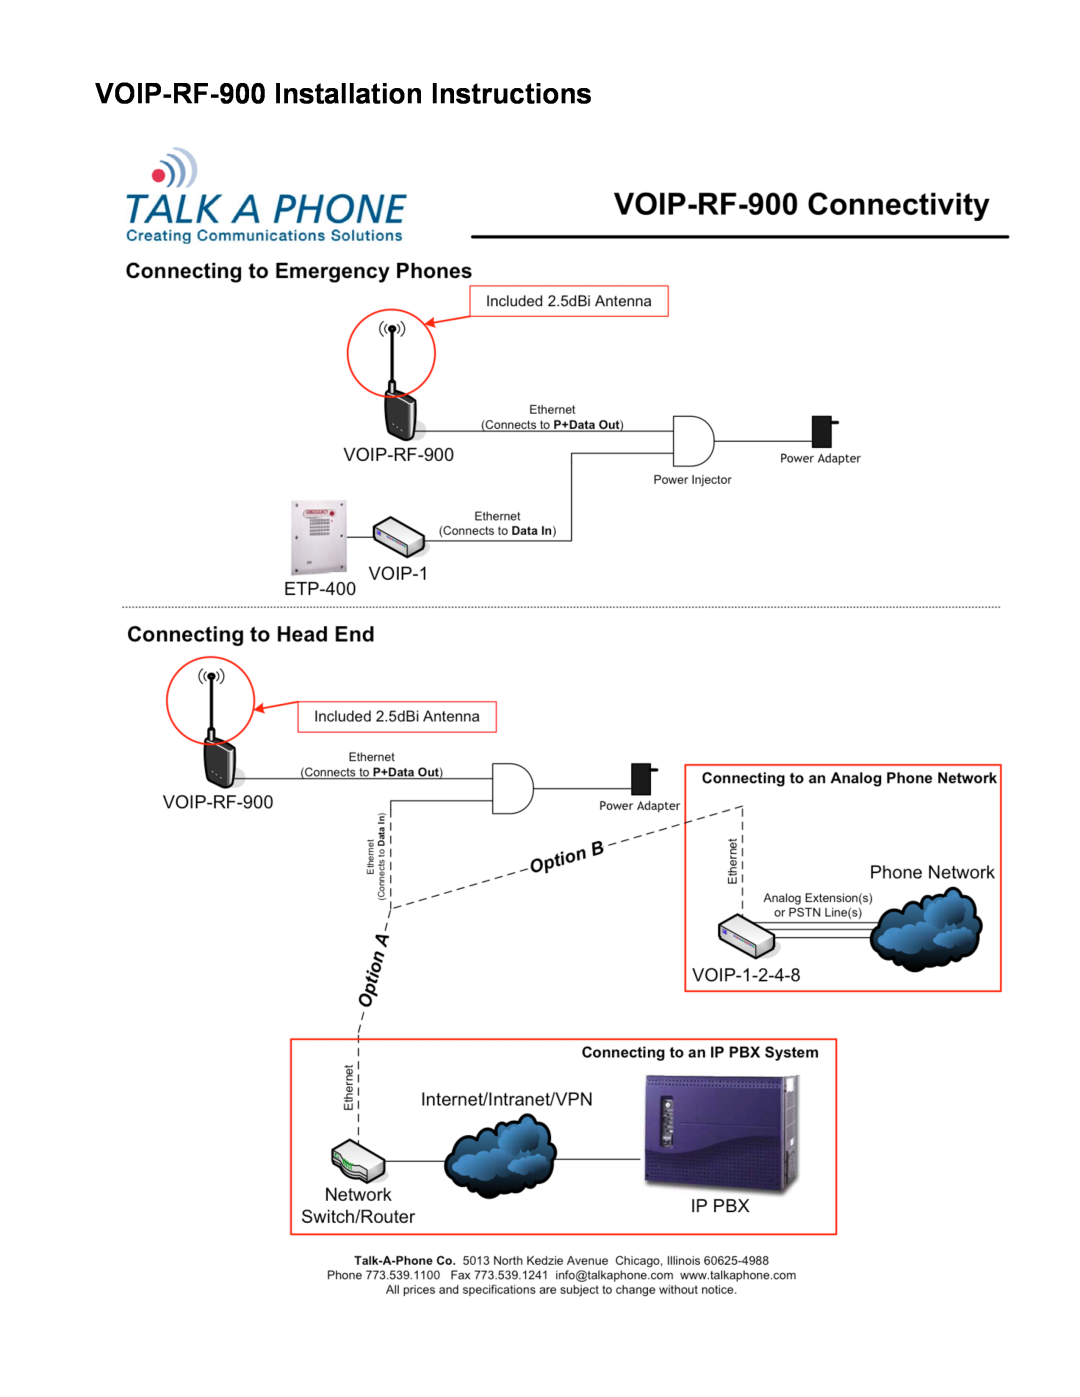 Talk electronic installation instructions VOIP-RF-900Installation Instructions 